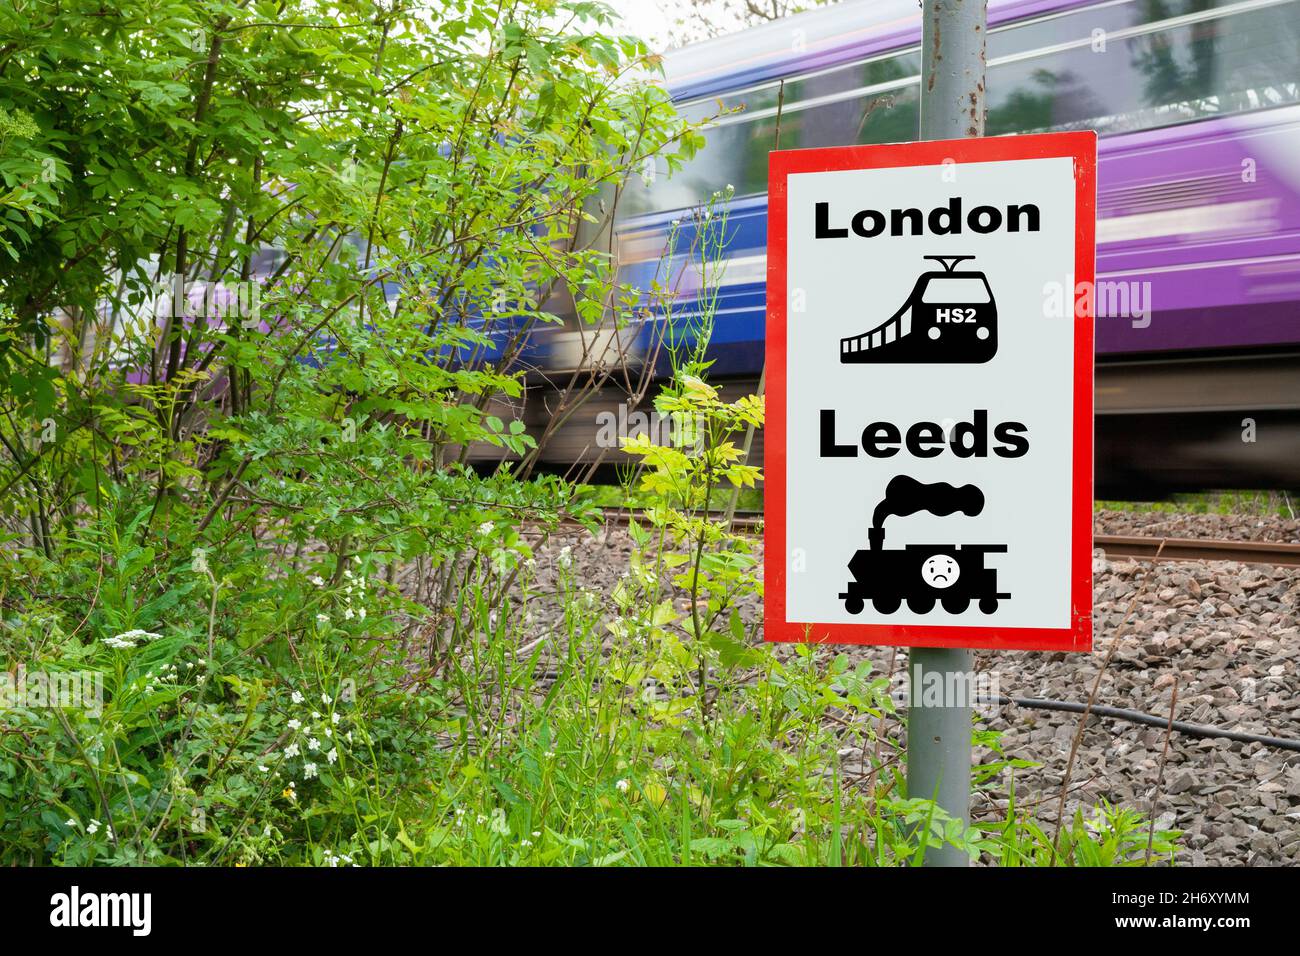 HS2 Leeds rail extension scrapped. Levelling up, northern powerhouse..., concept Stock Photo